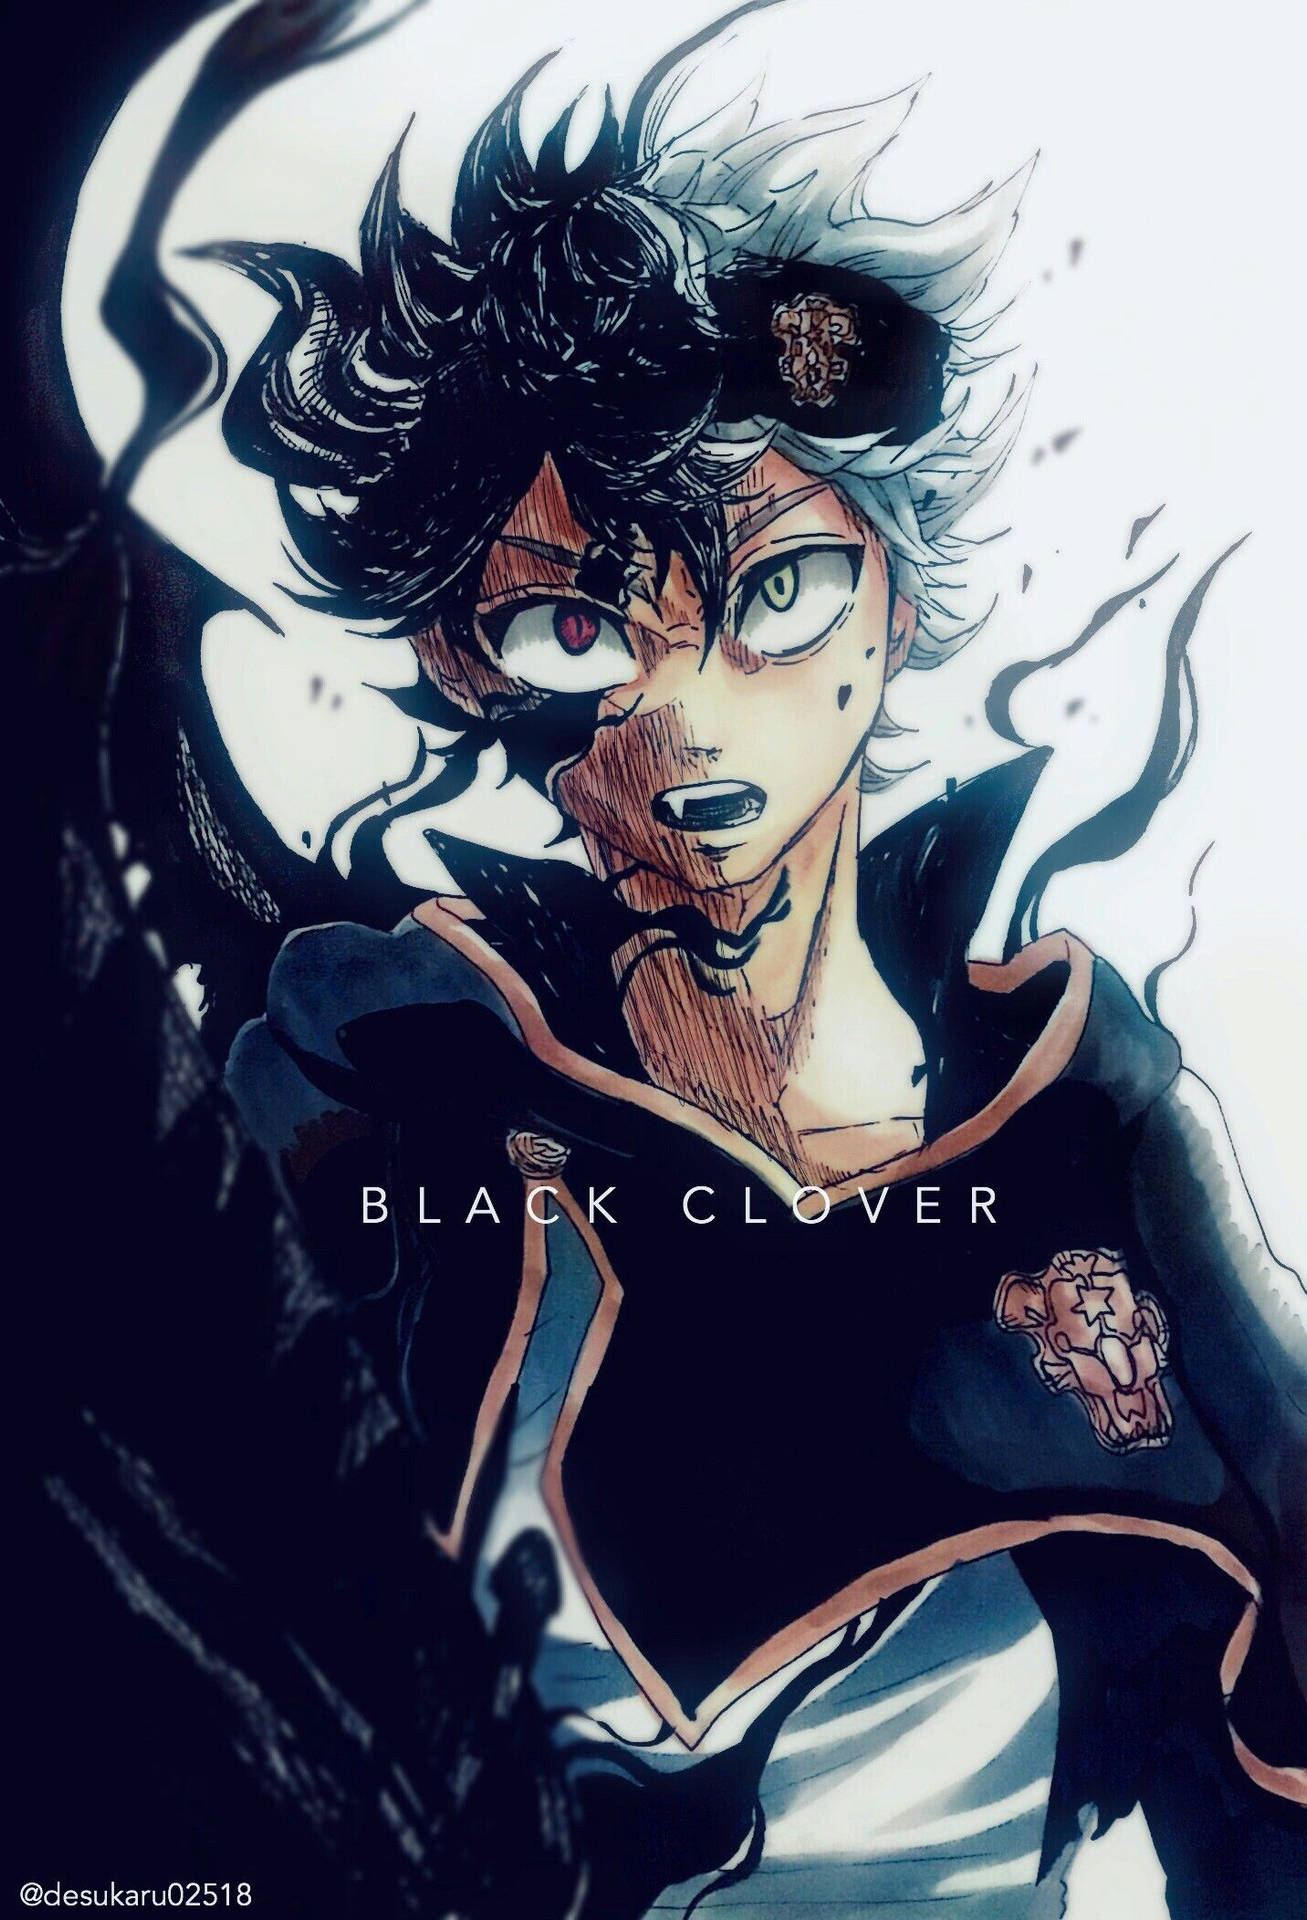 1432X2104 Black Clover Wallpaper and Background